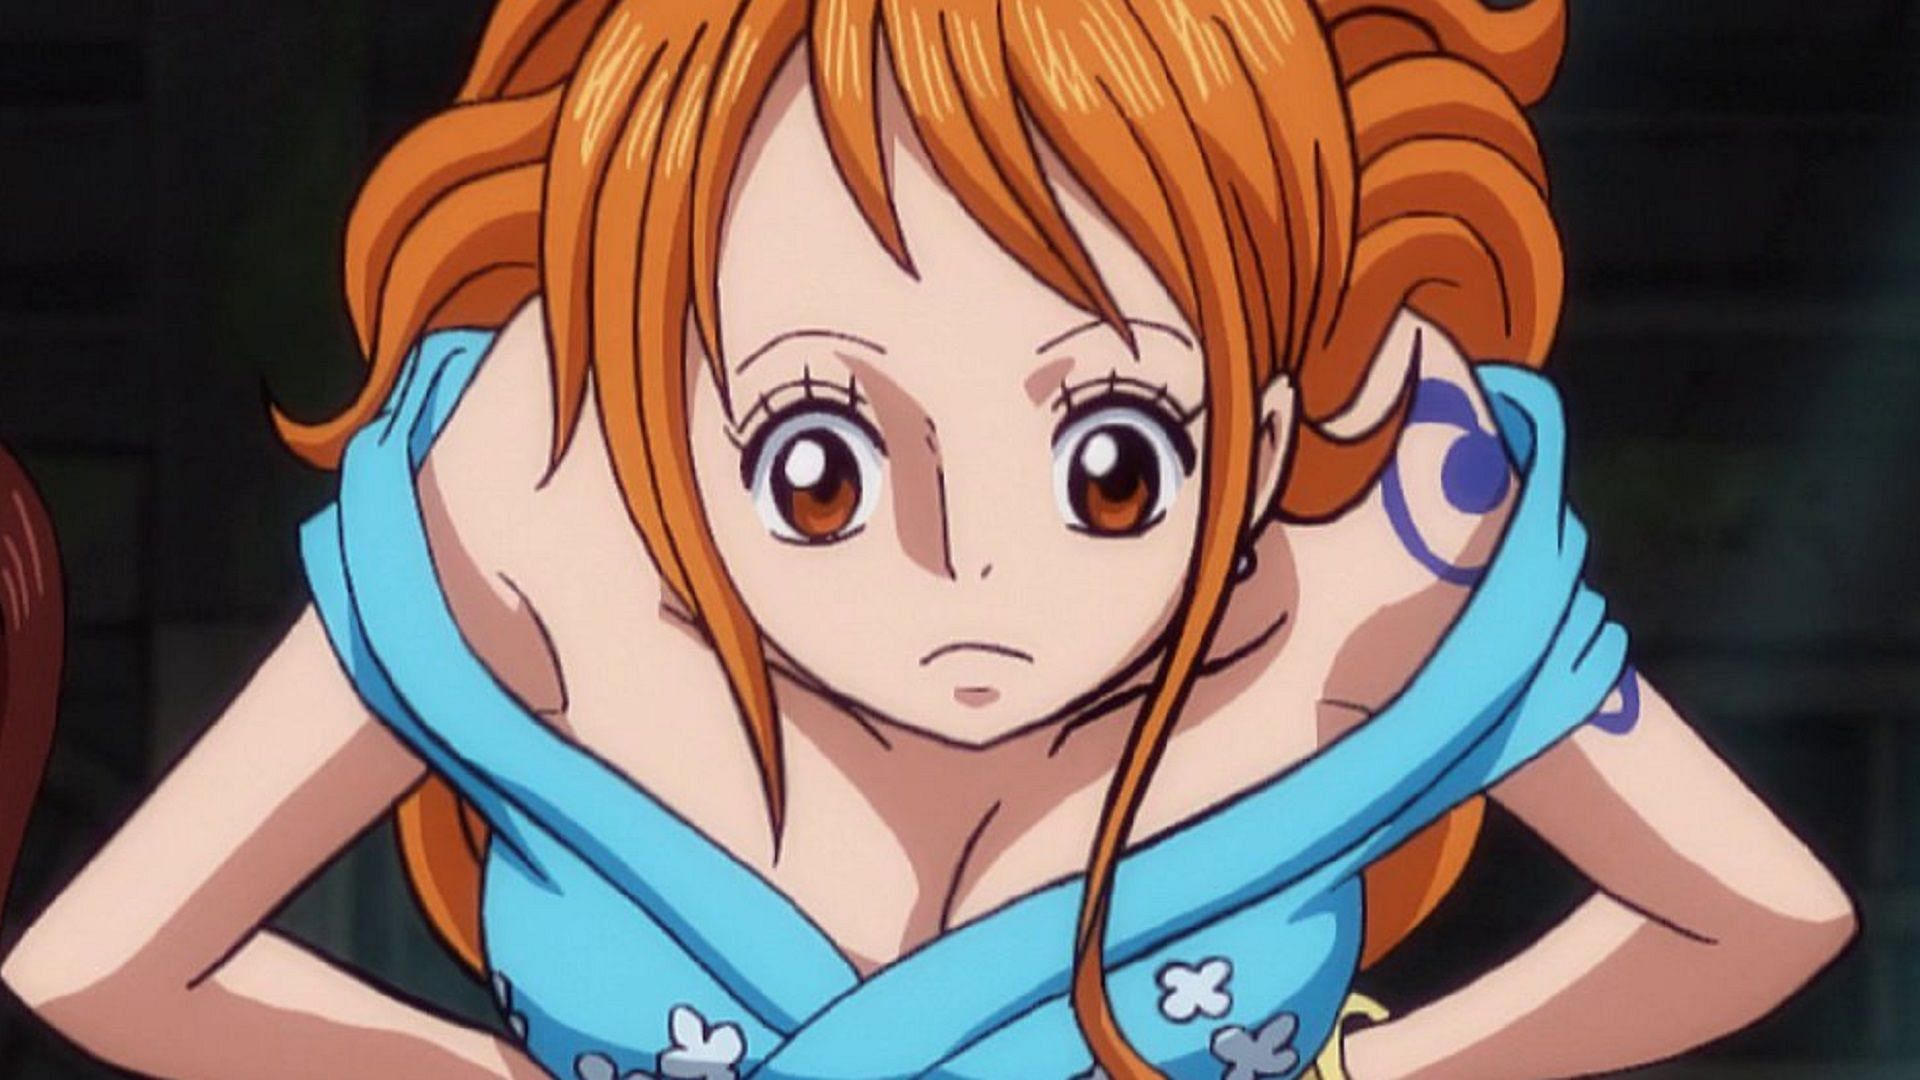 My top 10 favorite nami outfits